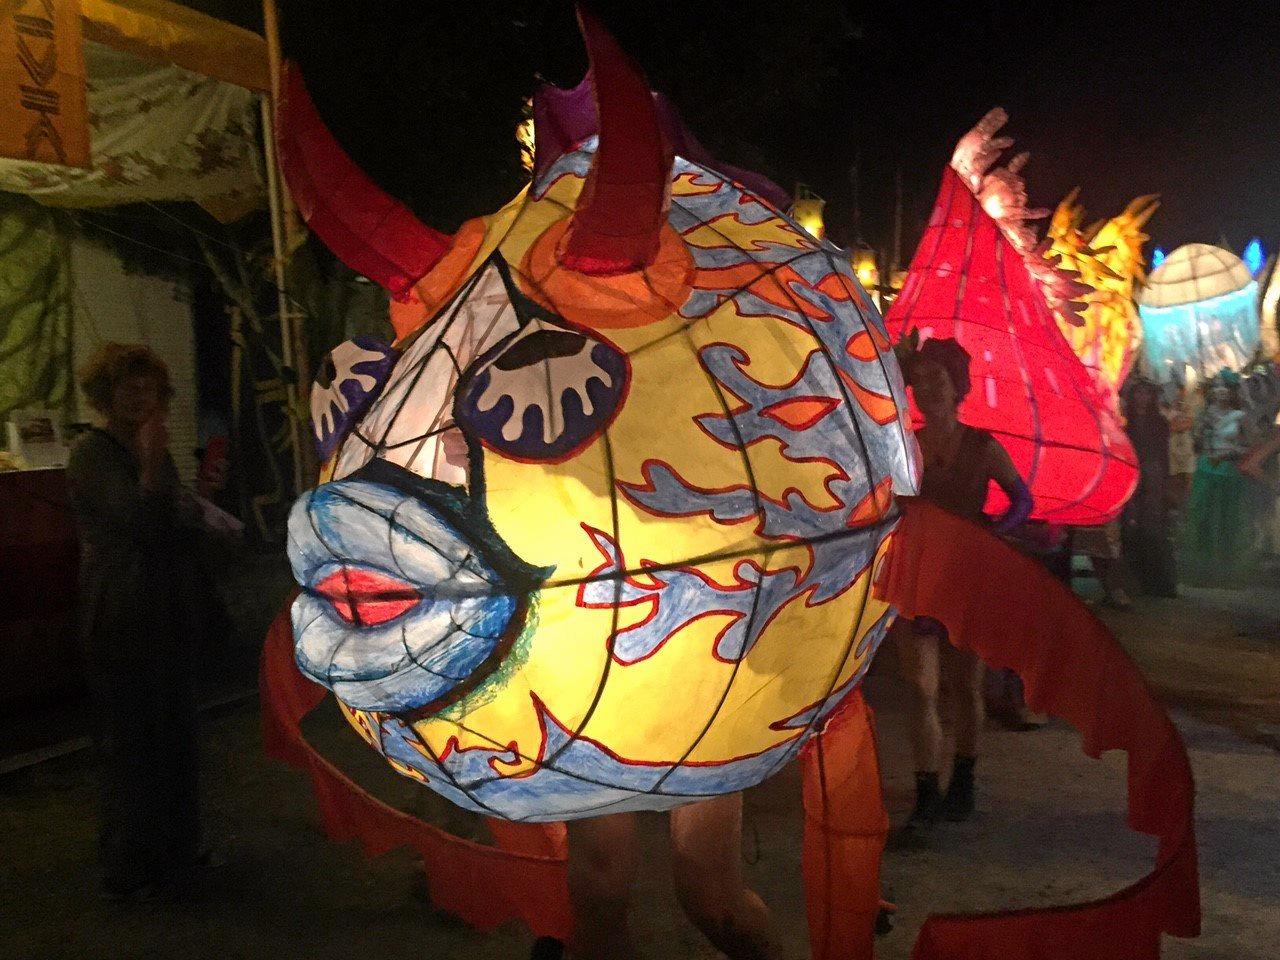 Woodford Folk Festival: Characters light up at night.